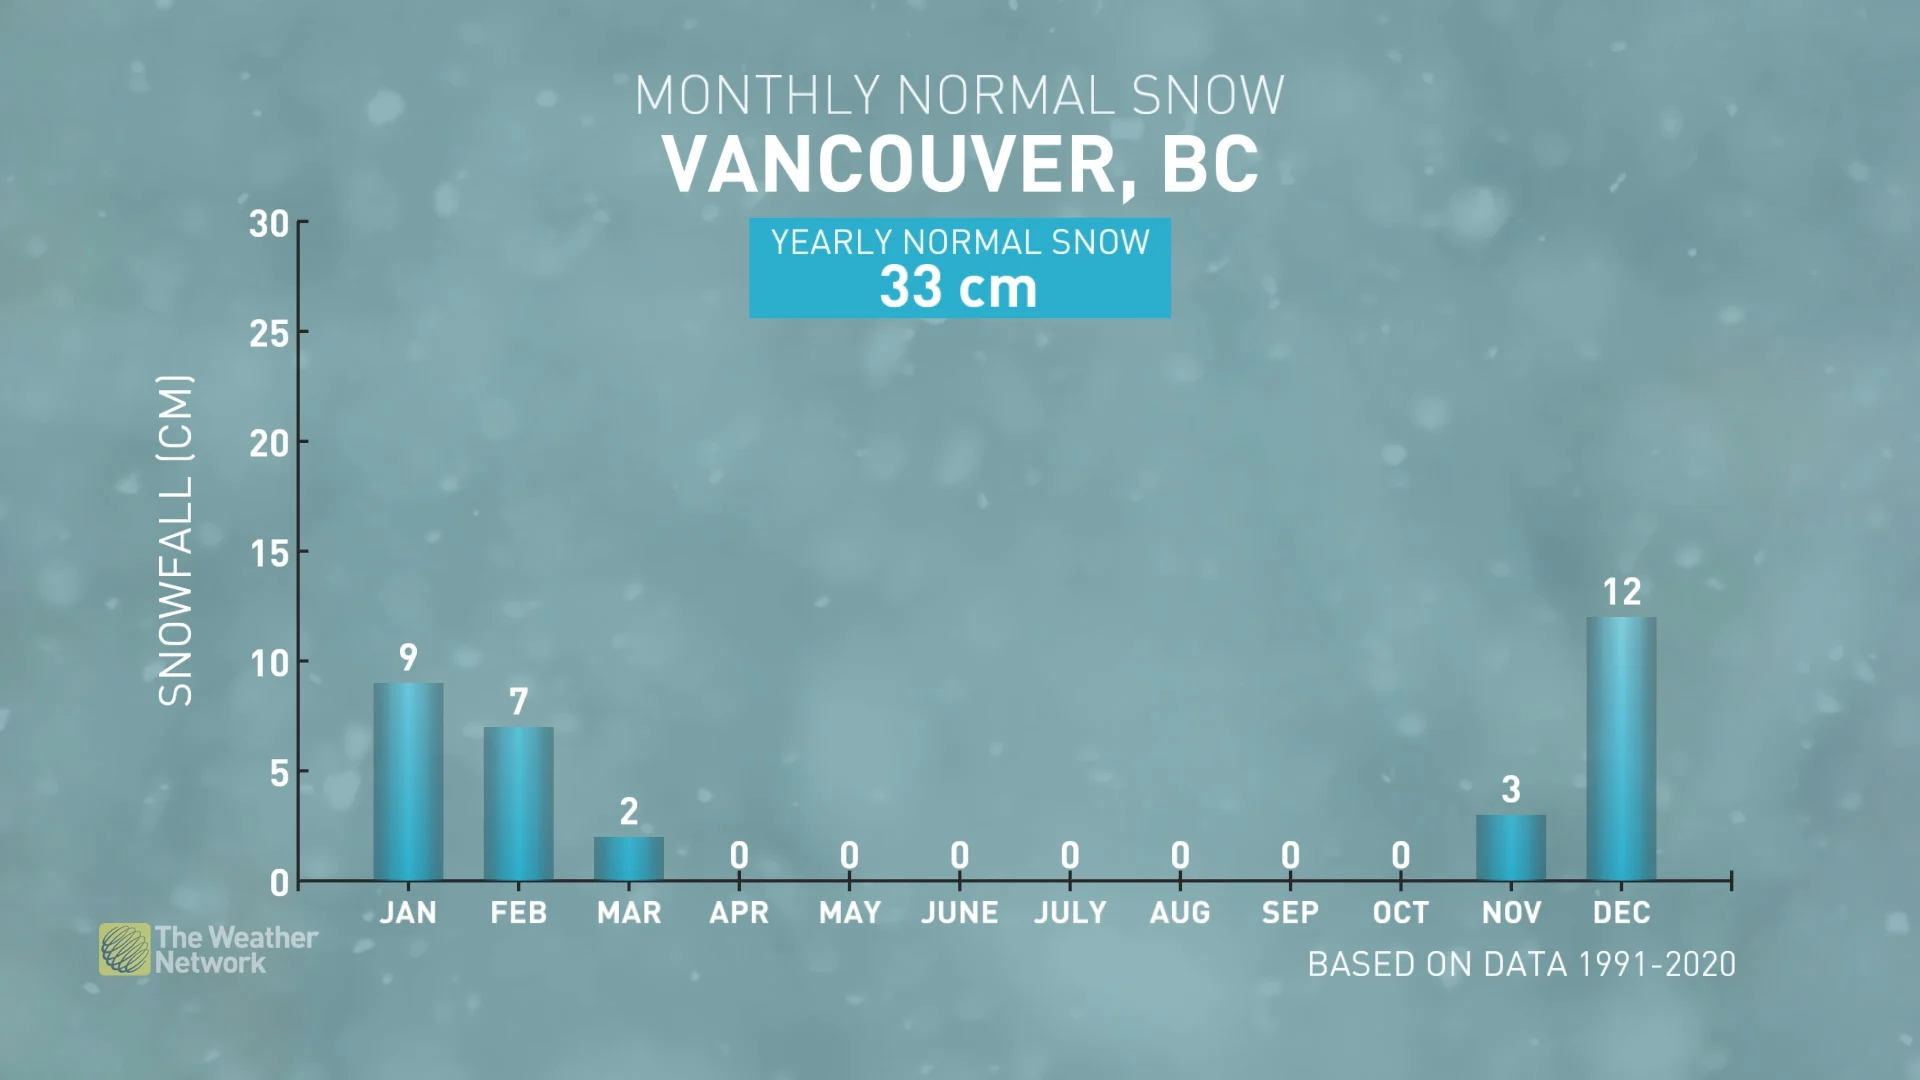 Explainer: Vancouver snowfall normals